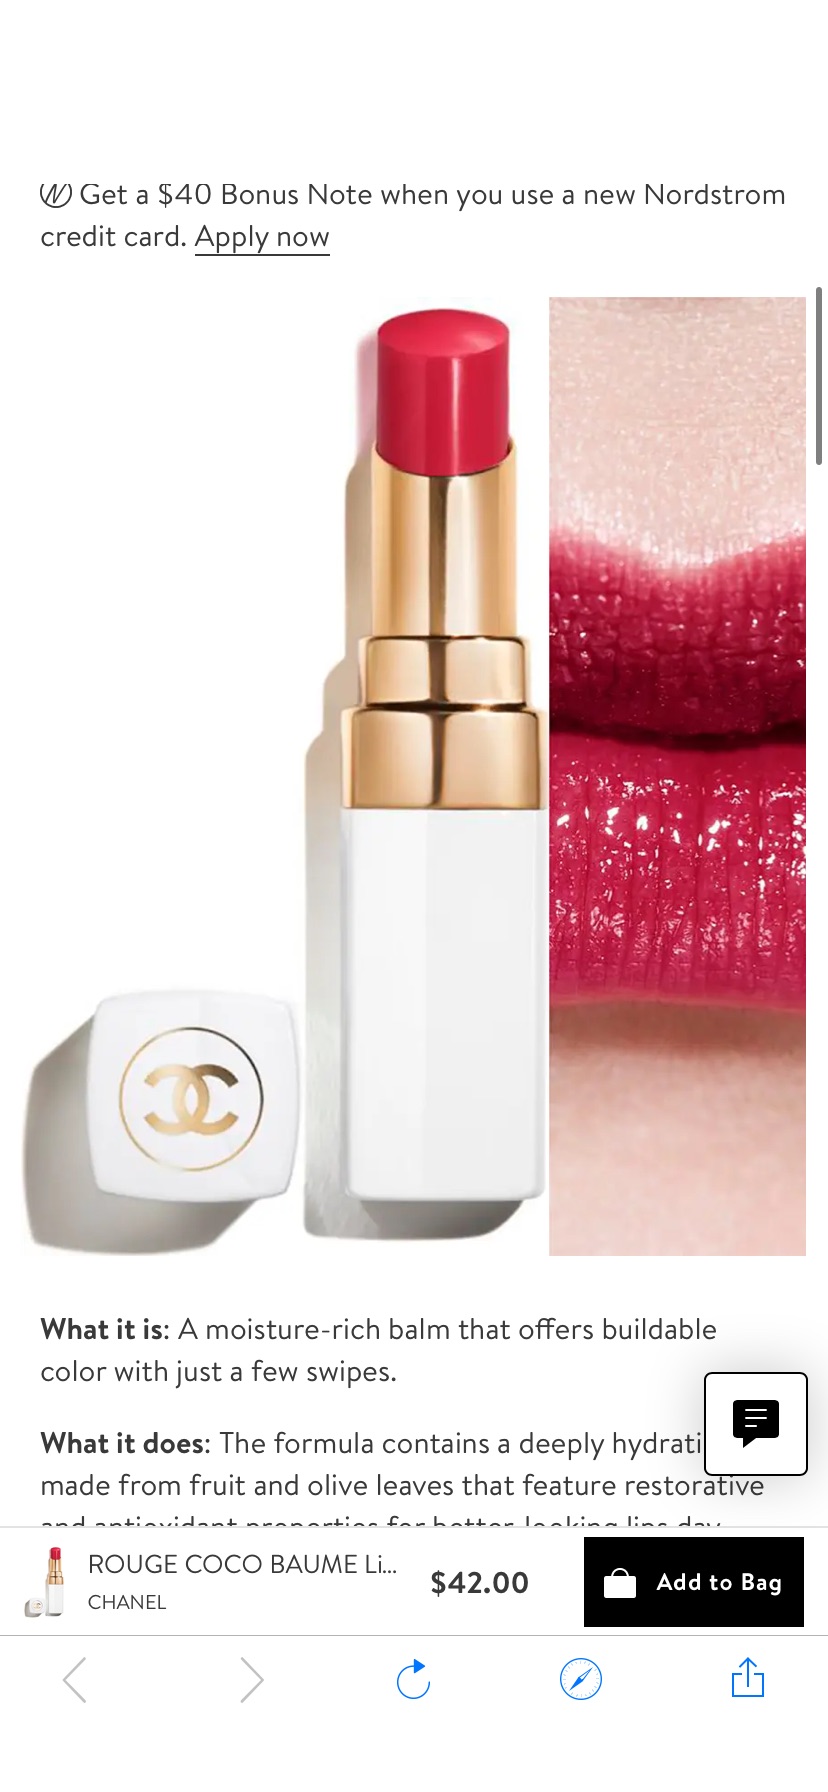 CHANEL ROUGE COCO BAUME Lip Balm | Nordstrom新款口红